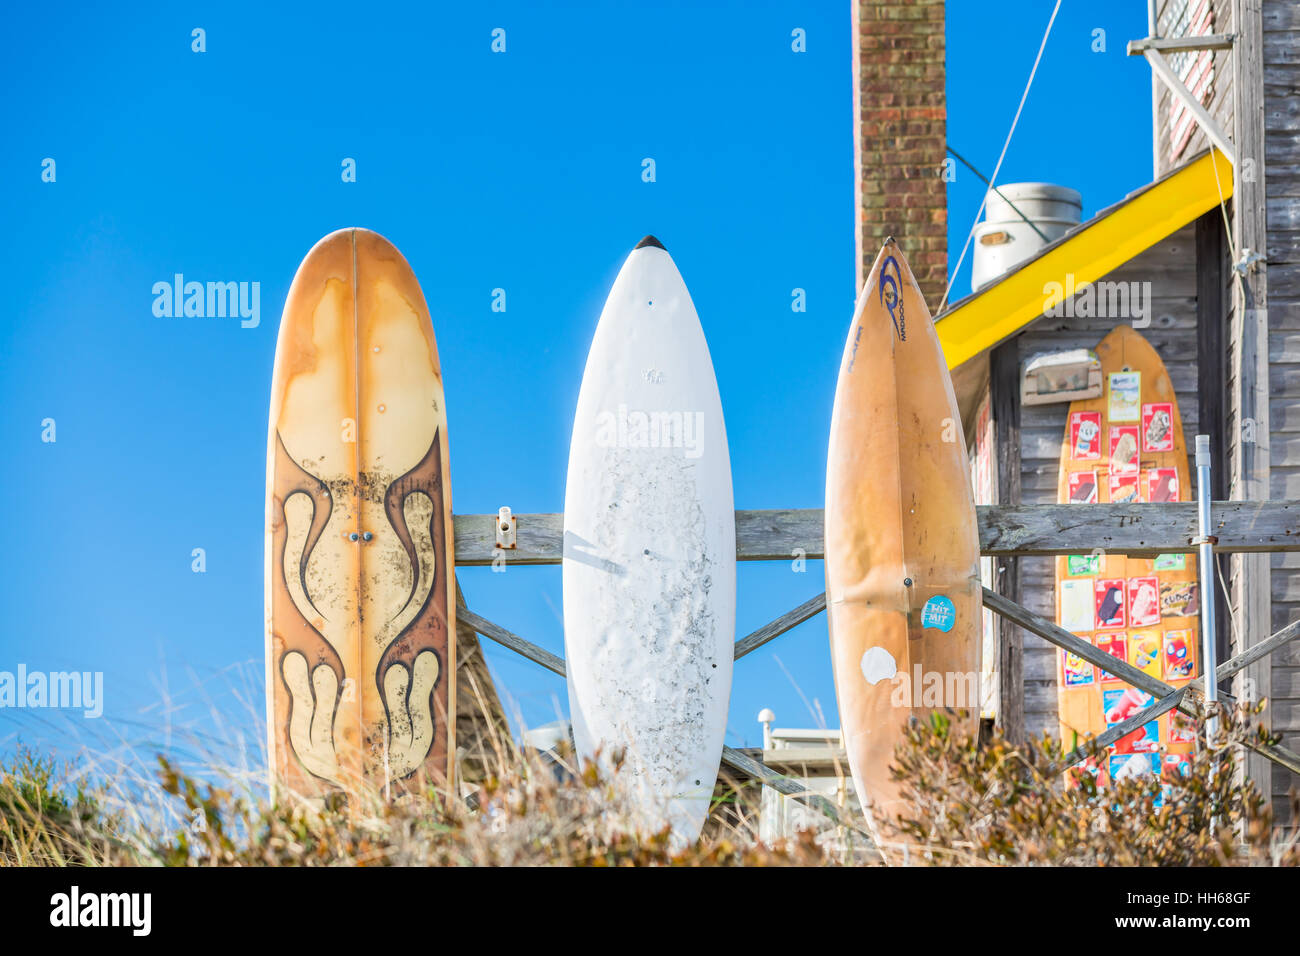 surf boards on display outside with a brilliant blue sky Stock Photo